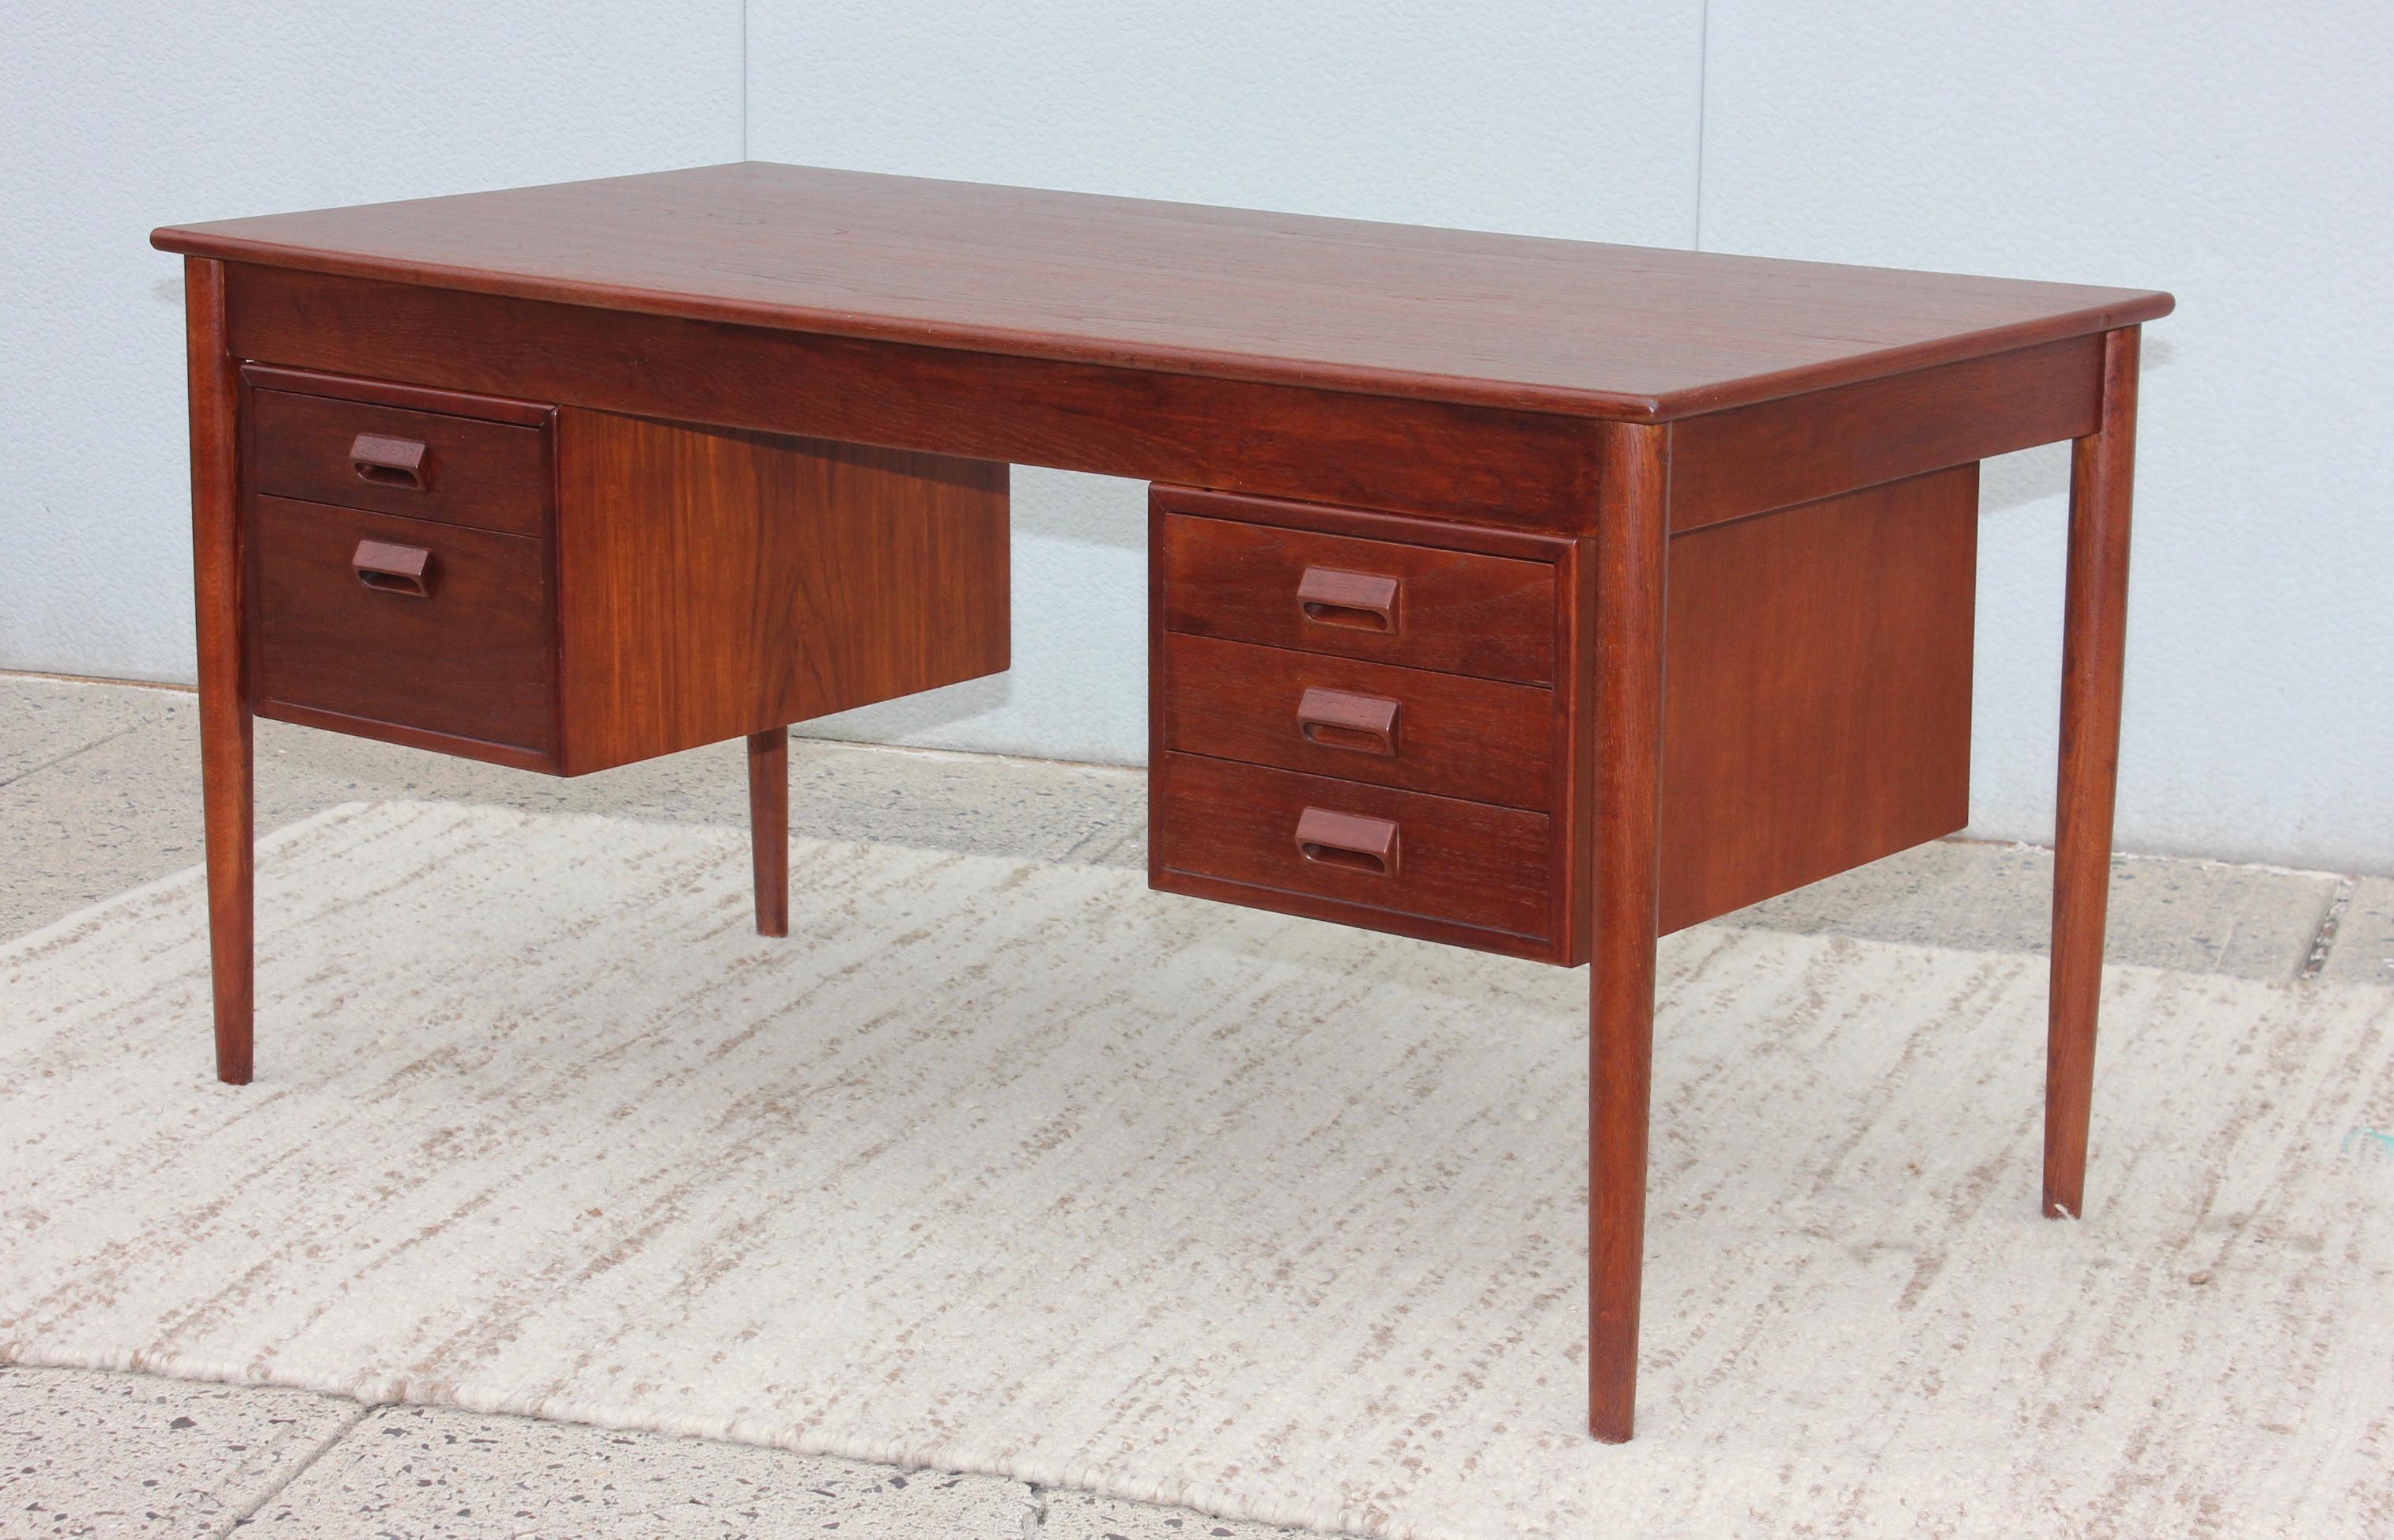 1950s teak executive desk designed by Borge Morgensen for Soborg Mobler. Fully restored, a few small dents to the top.